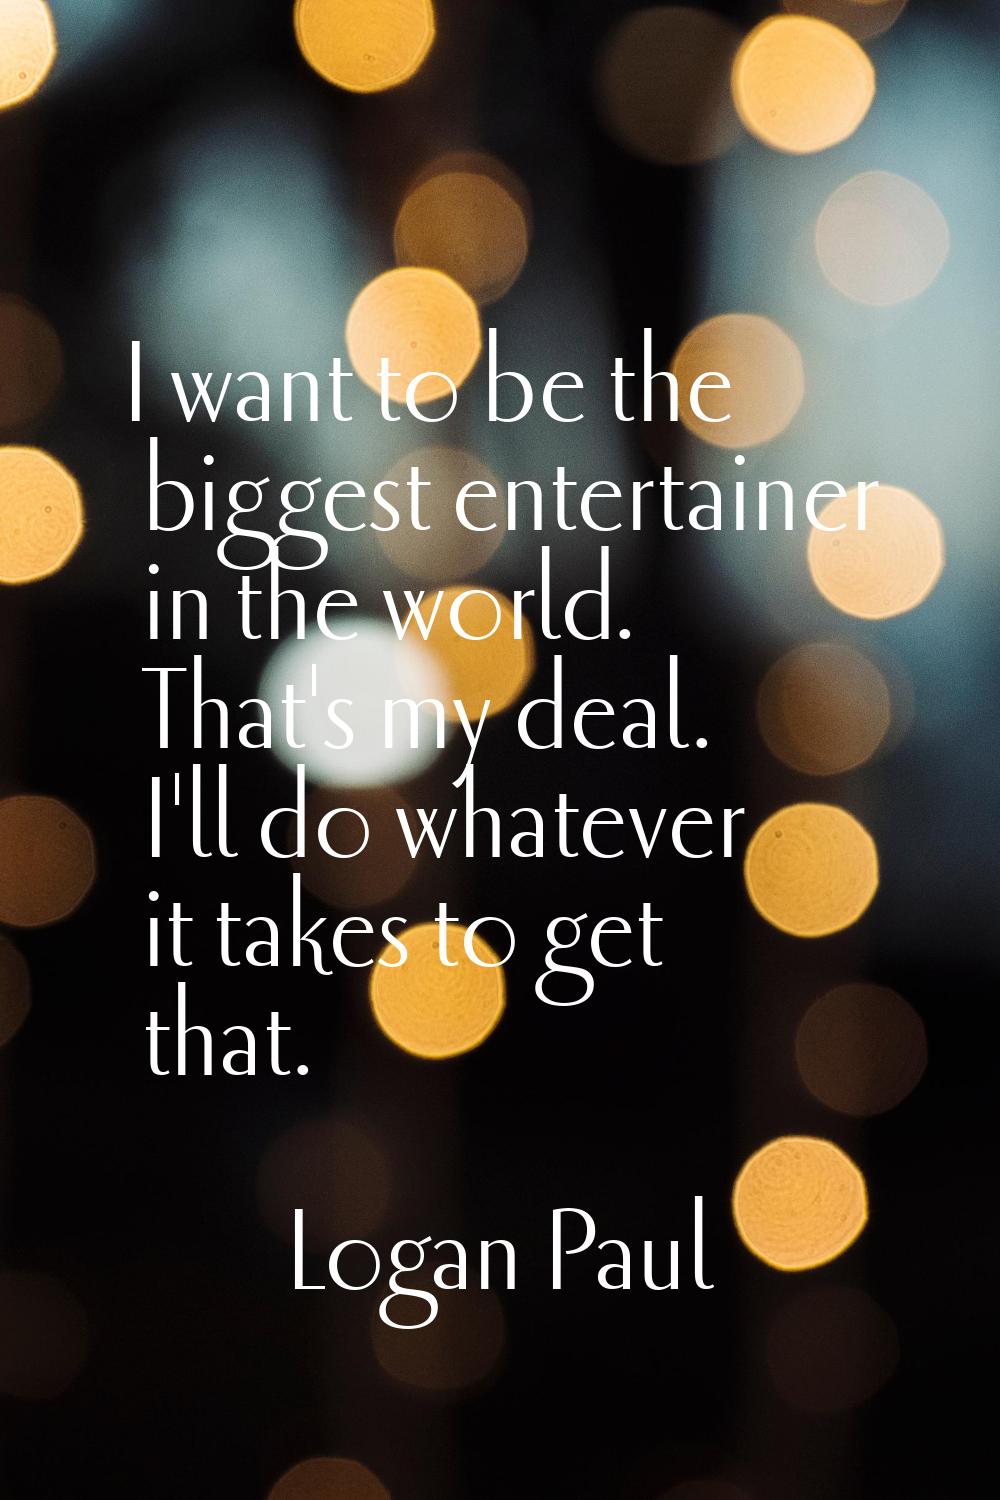 I want to be the biggest entertainer in the world. That's my deal. I'll do whatever it takes to get